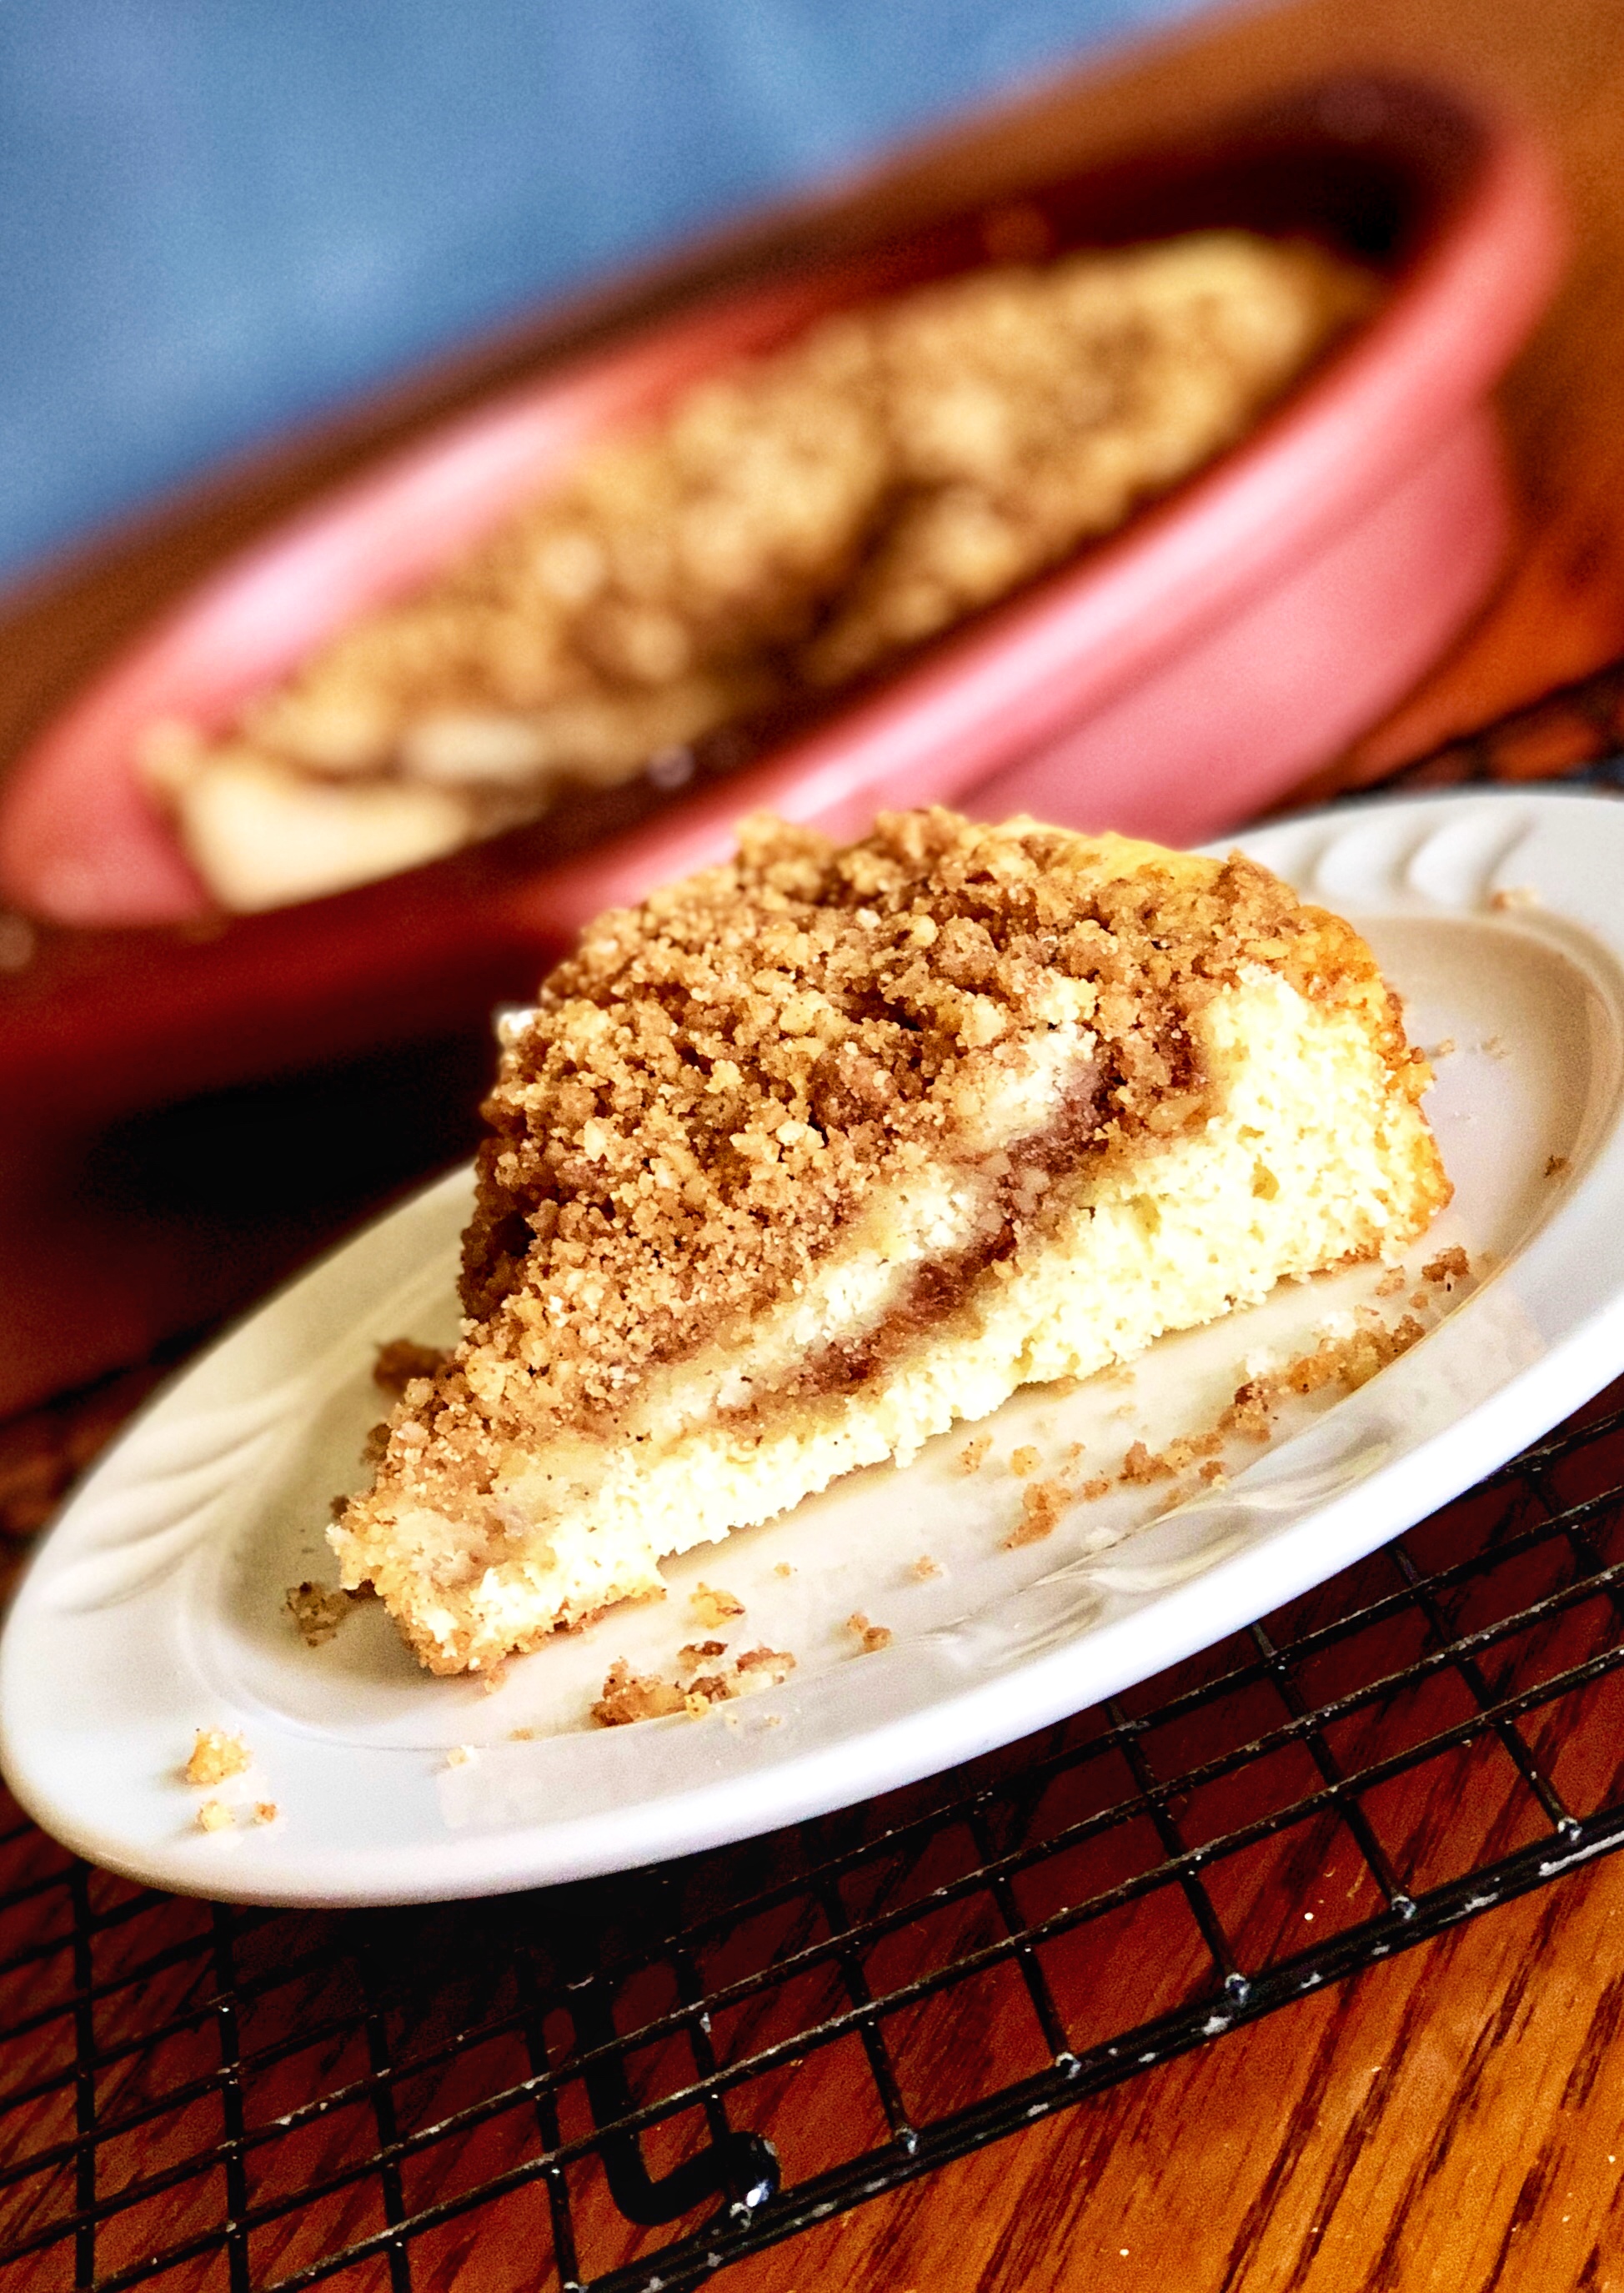 <p>With a nutty pecan and cinnamon streusel filling swirled through this buttery cake, it's sure to be a hit with family and friends at your next brunch!</p>
                          